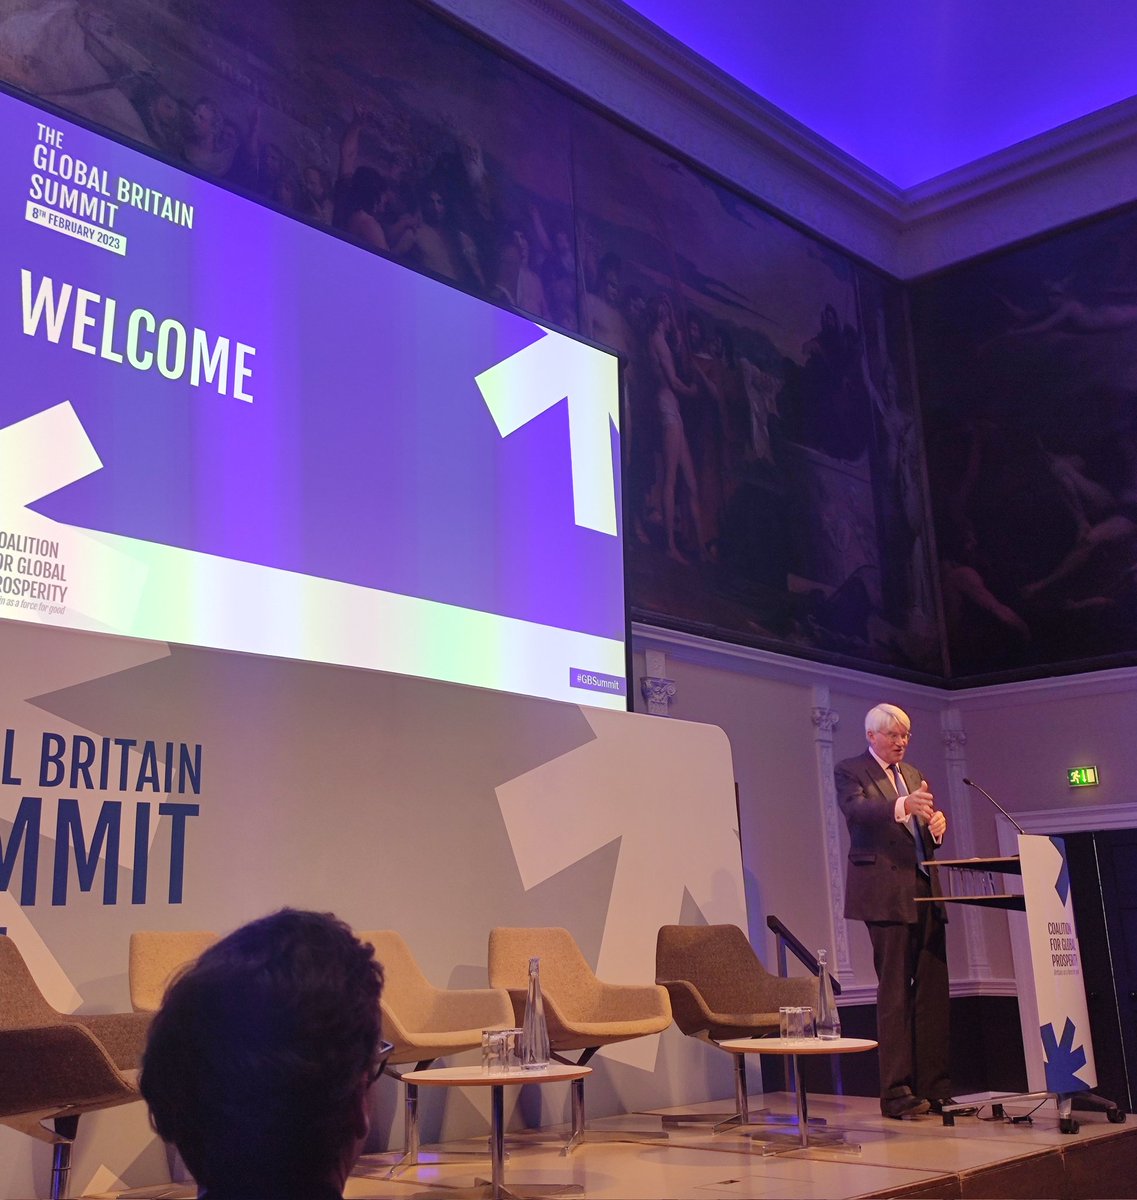 Minister @AndrewmitchMP opens the #GBSummit outlining the gov priorities to bring the UK back to the forefront of #InternationalDevelopment: 'Our work should be predictable, embrace scrutiny and value for money'